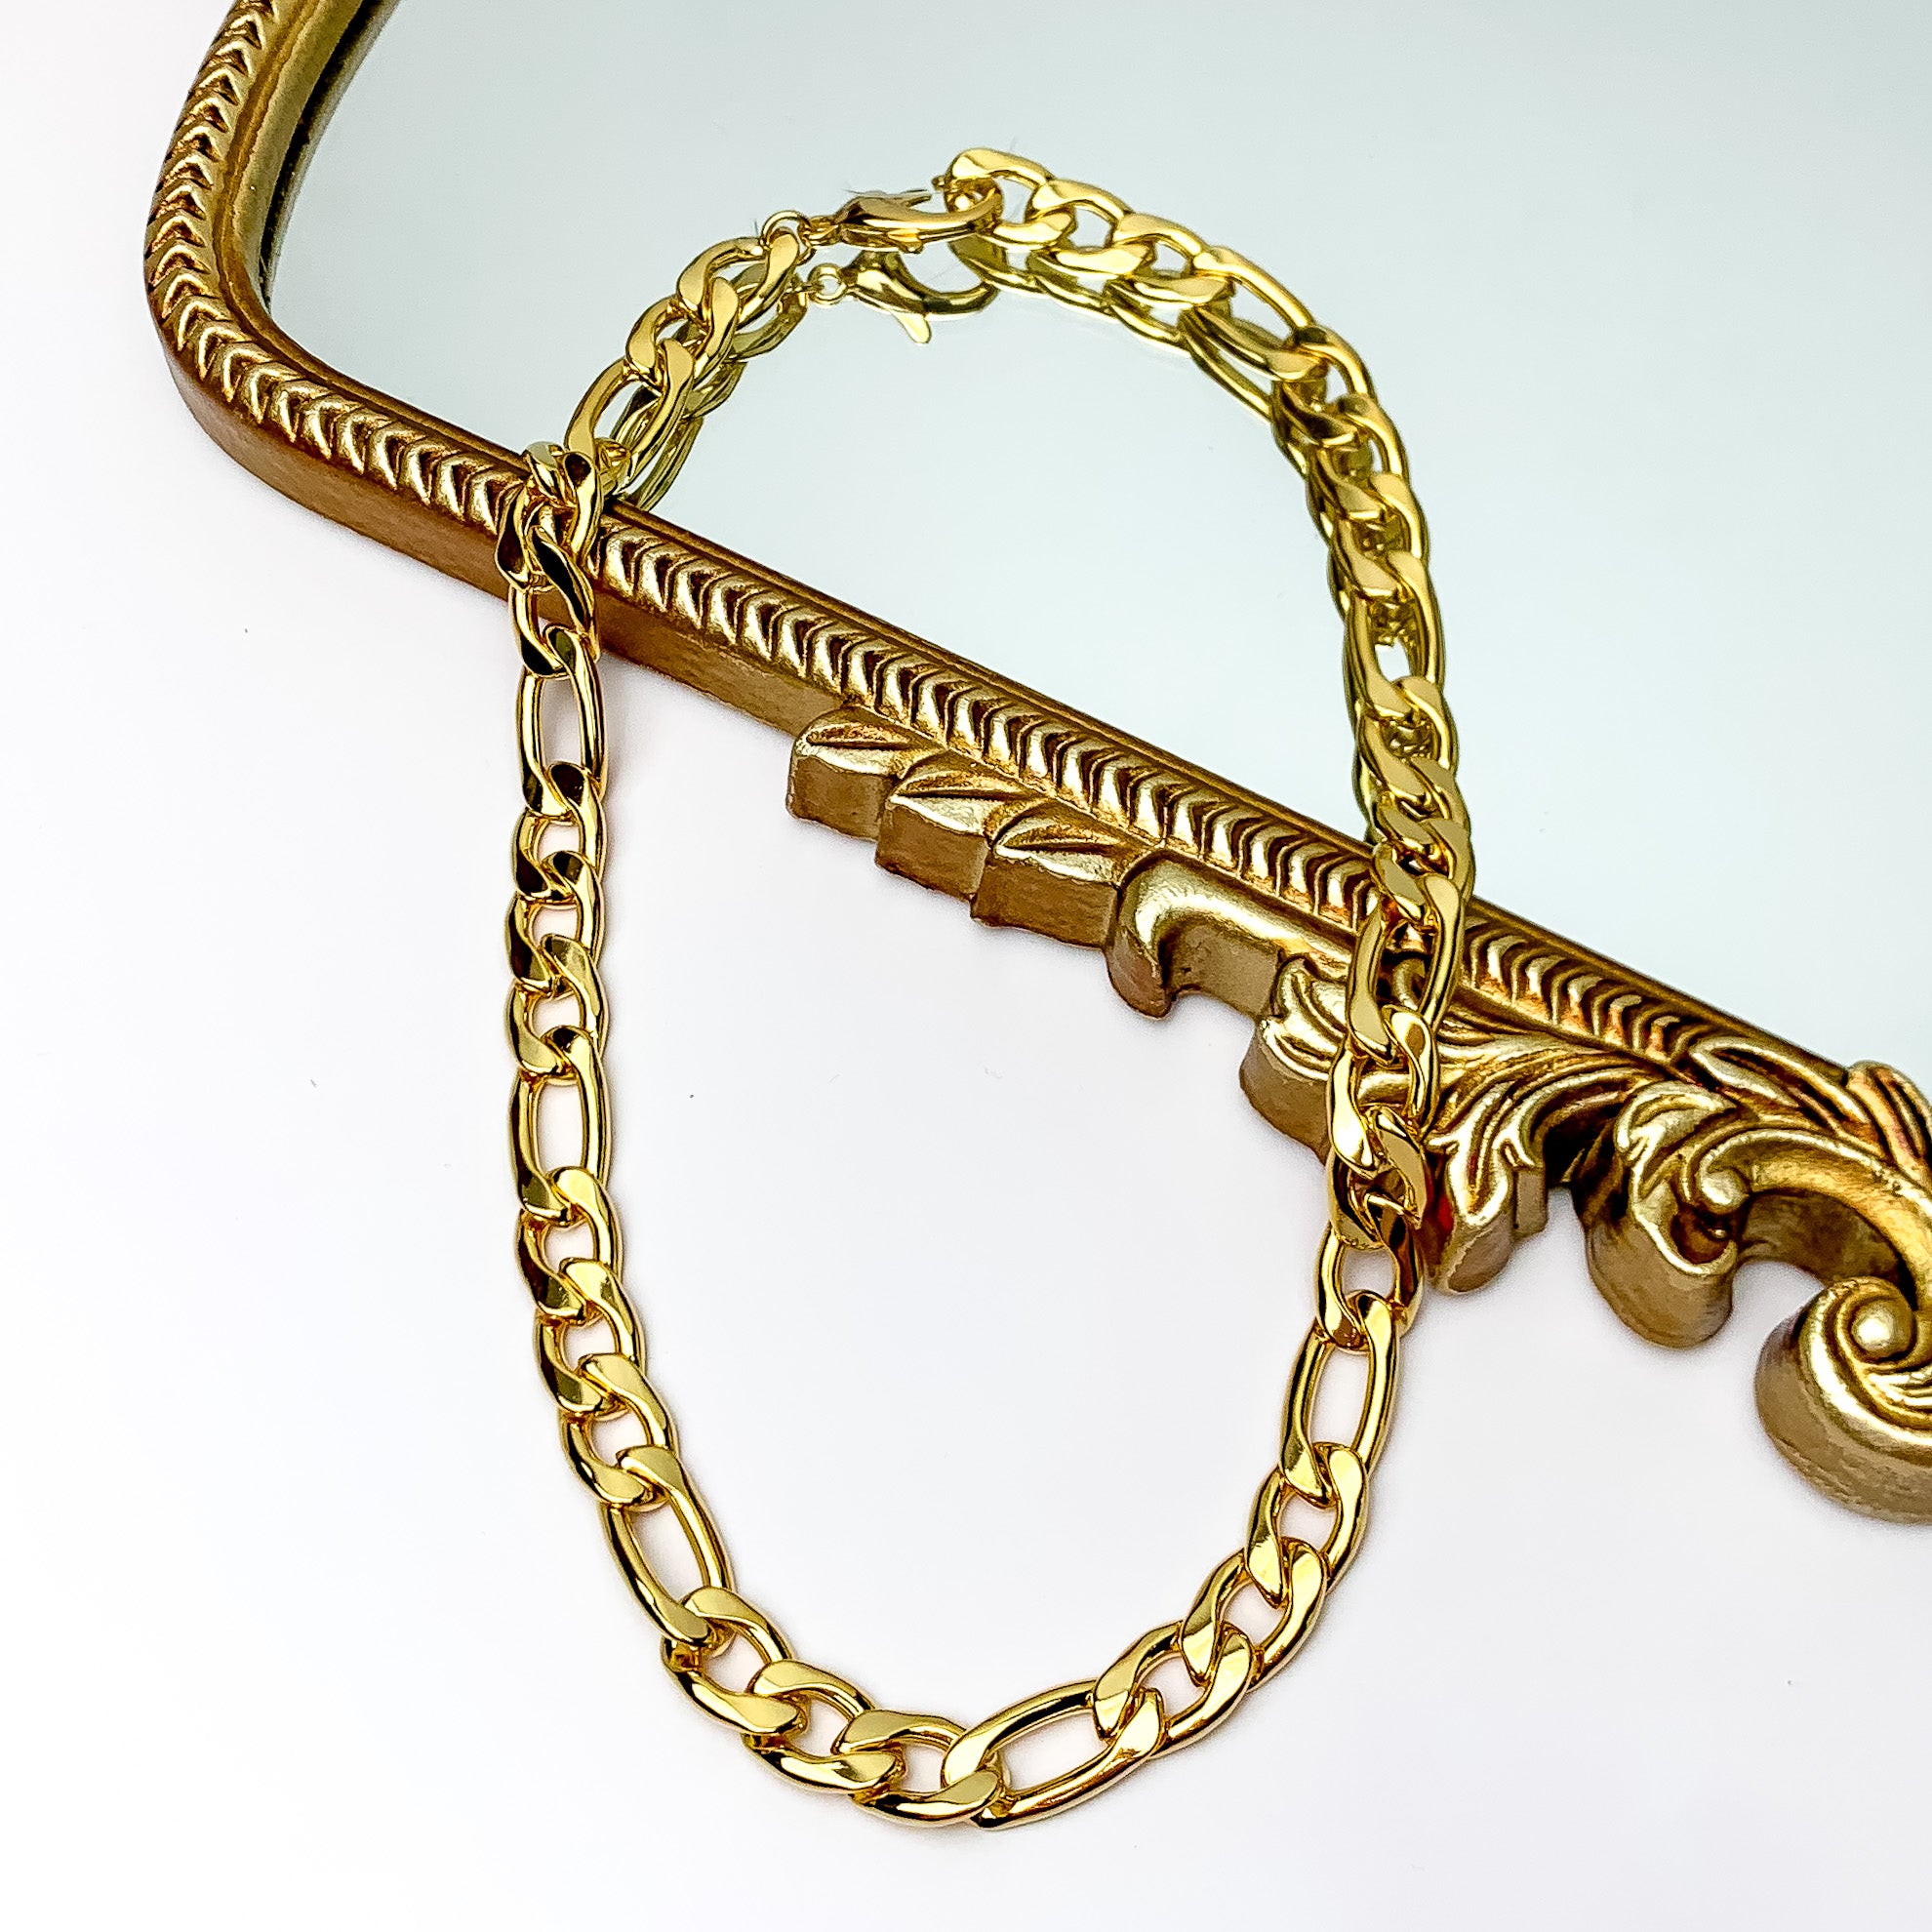 Pictured is a gold, curb chain necklace. This necklace is pictured partially laying on a gold mirror on a white background.  